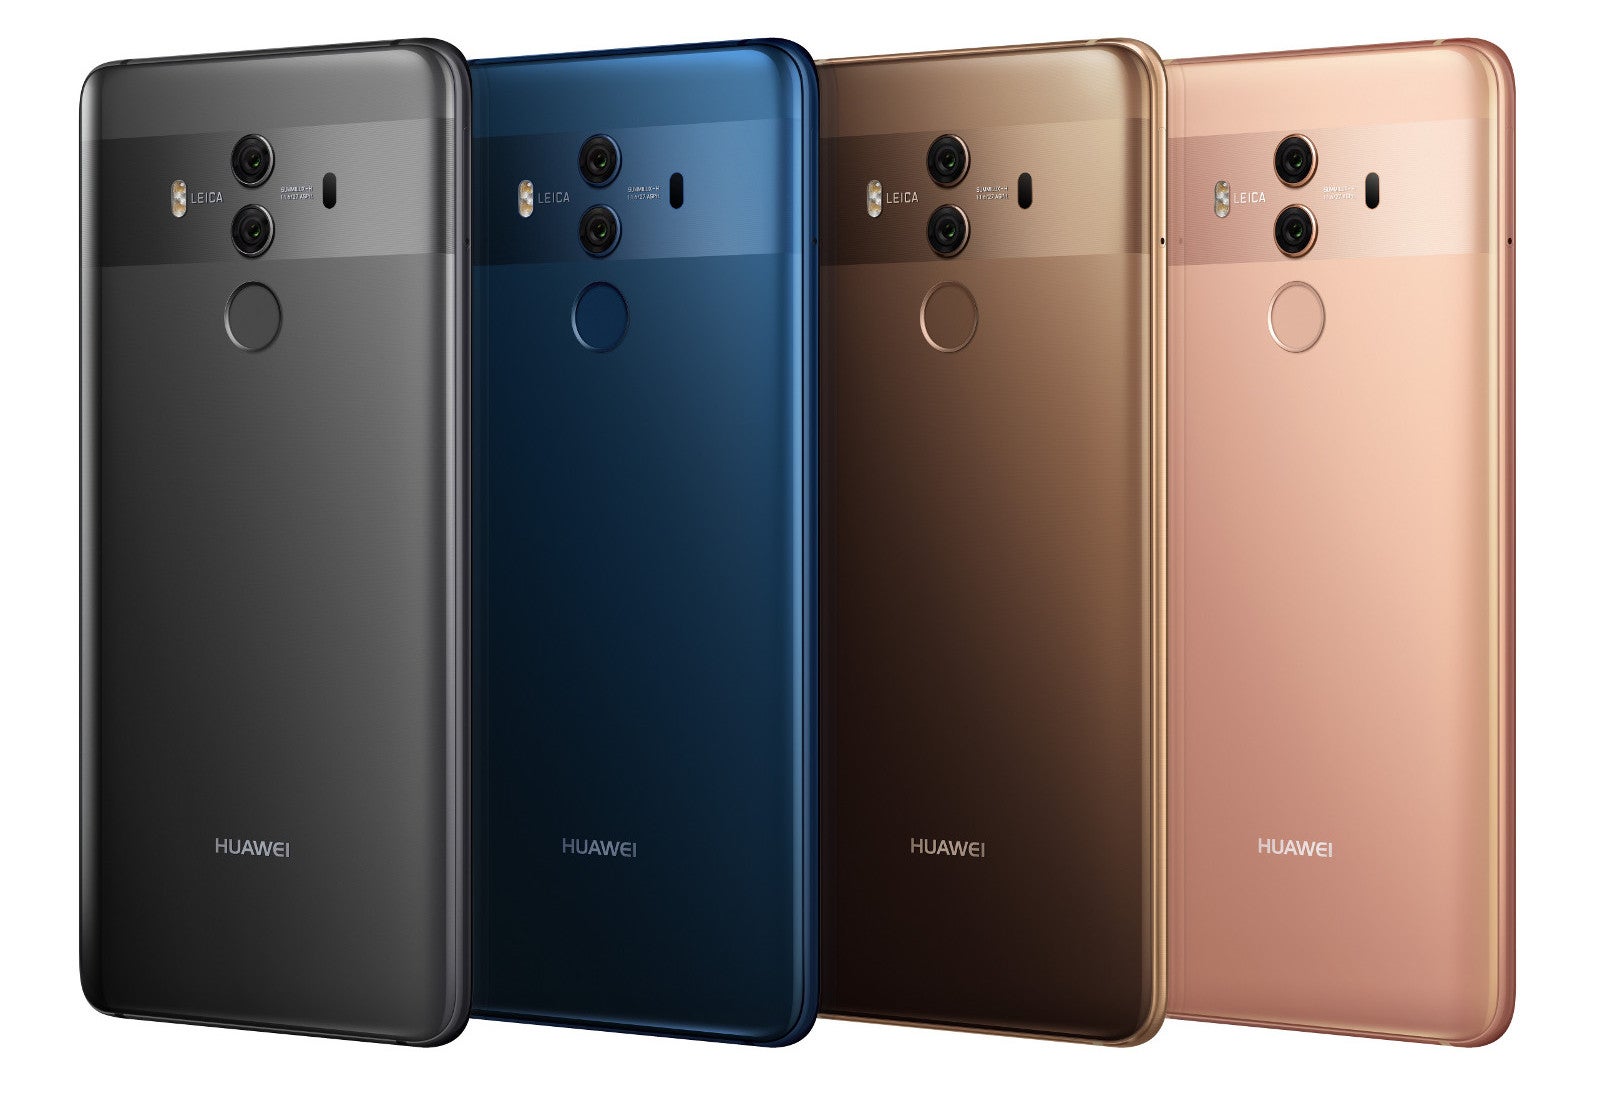 Huawei could start selling its own "Made for Huawei" accessories